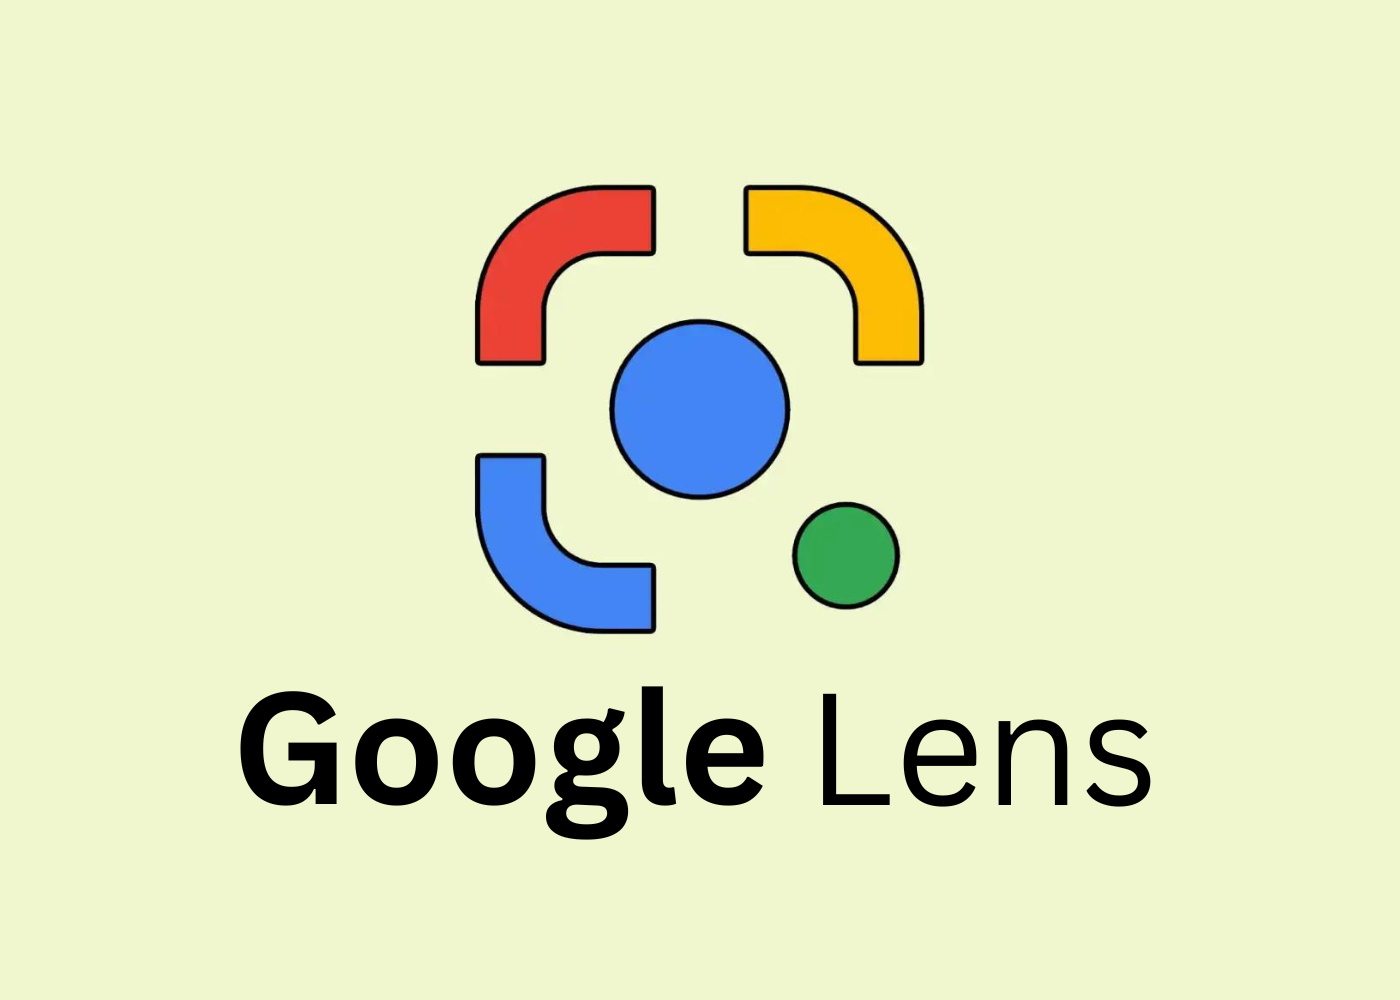 What Is Google Lens?